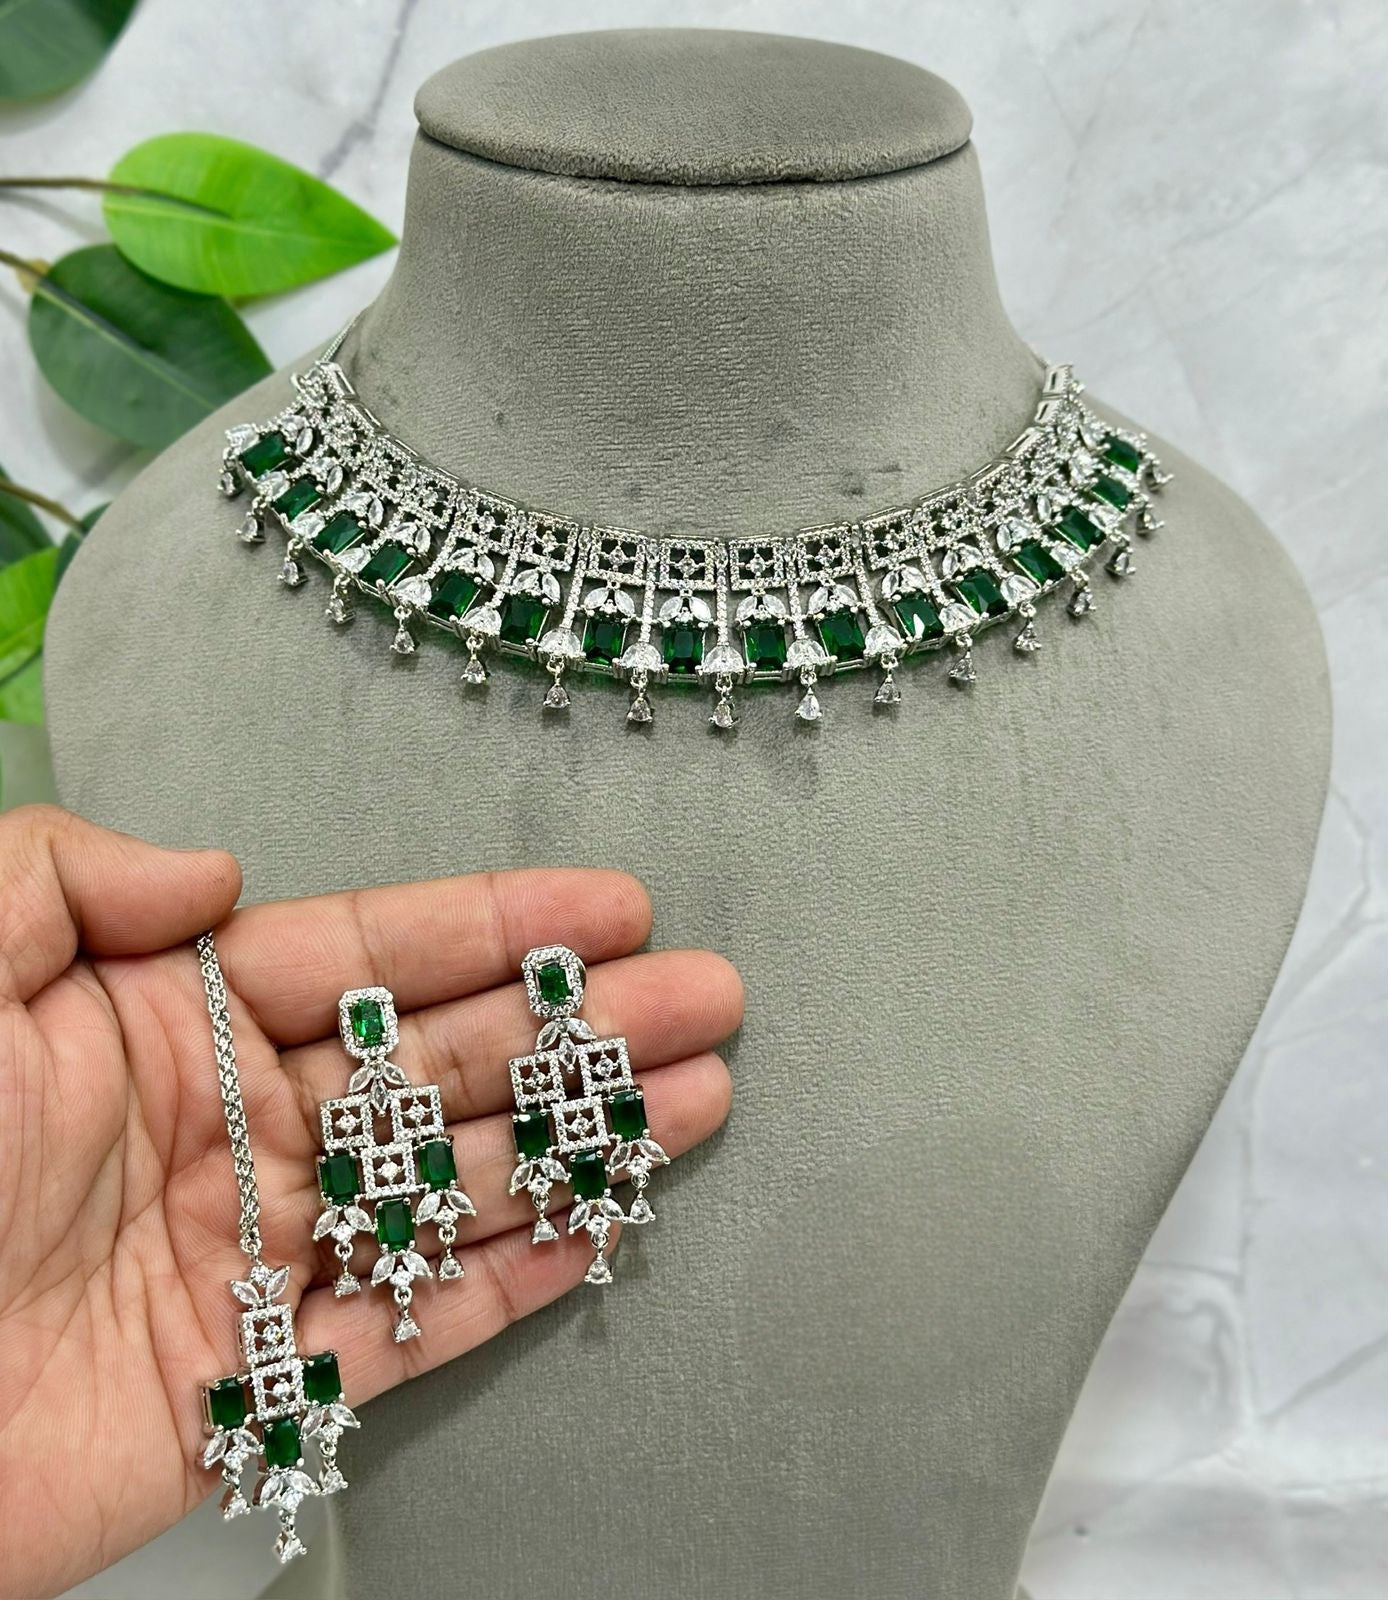 American Diamond Necklace Set with Matching Earrings